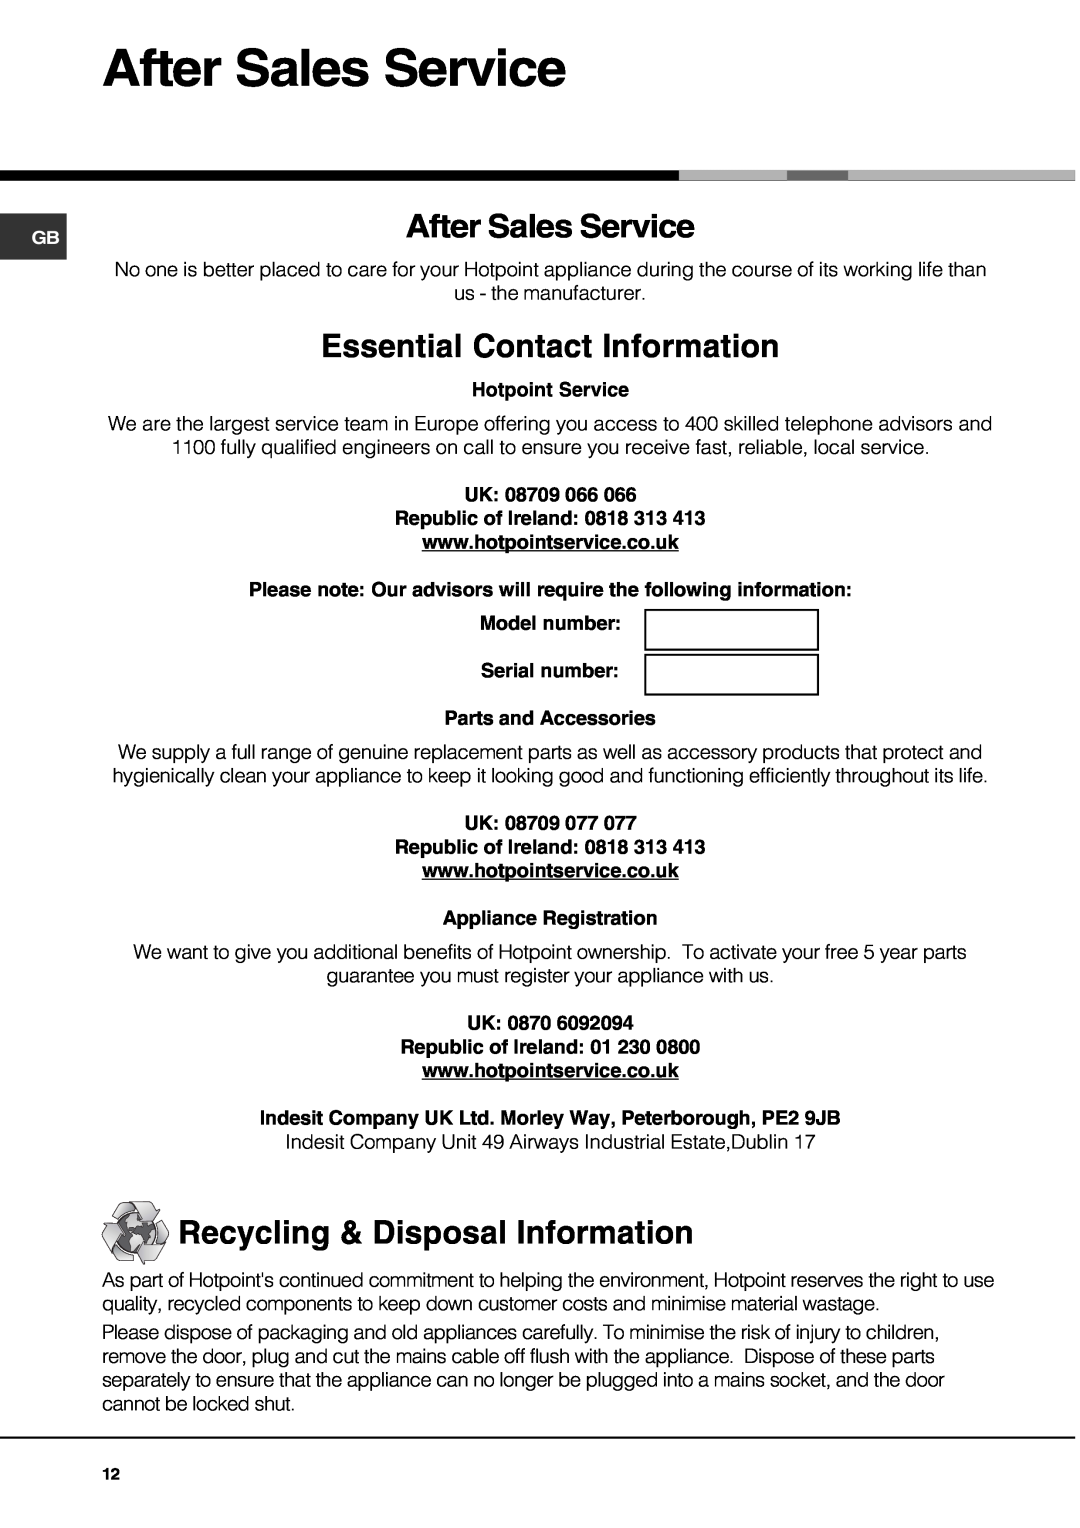 Hotpoint SQ661I/1, SE661X/1, SE662K/1 After Sales Service, Essential Contact Information, Recycling & Disposal Information 